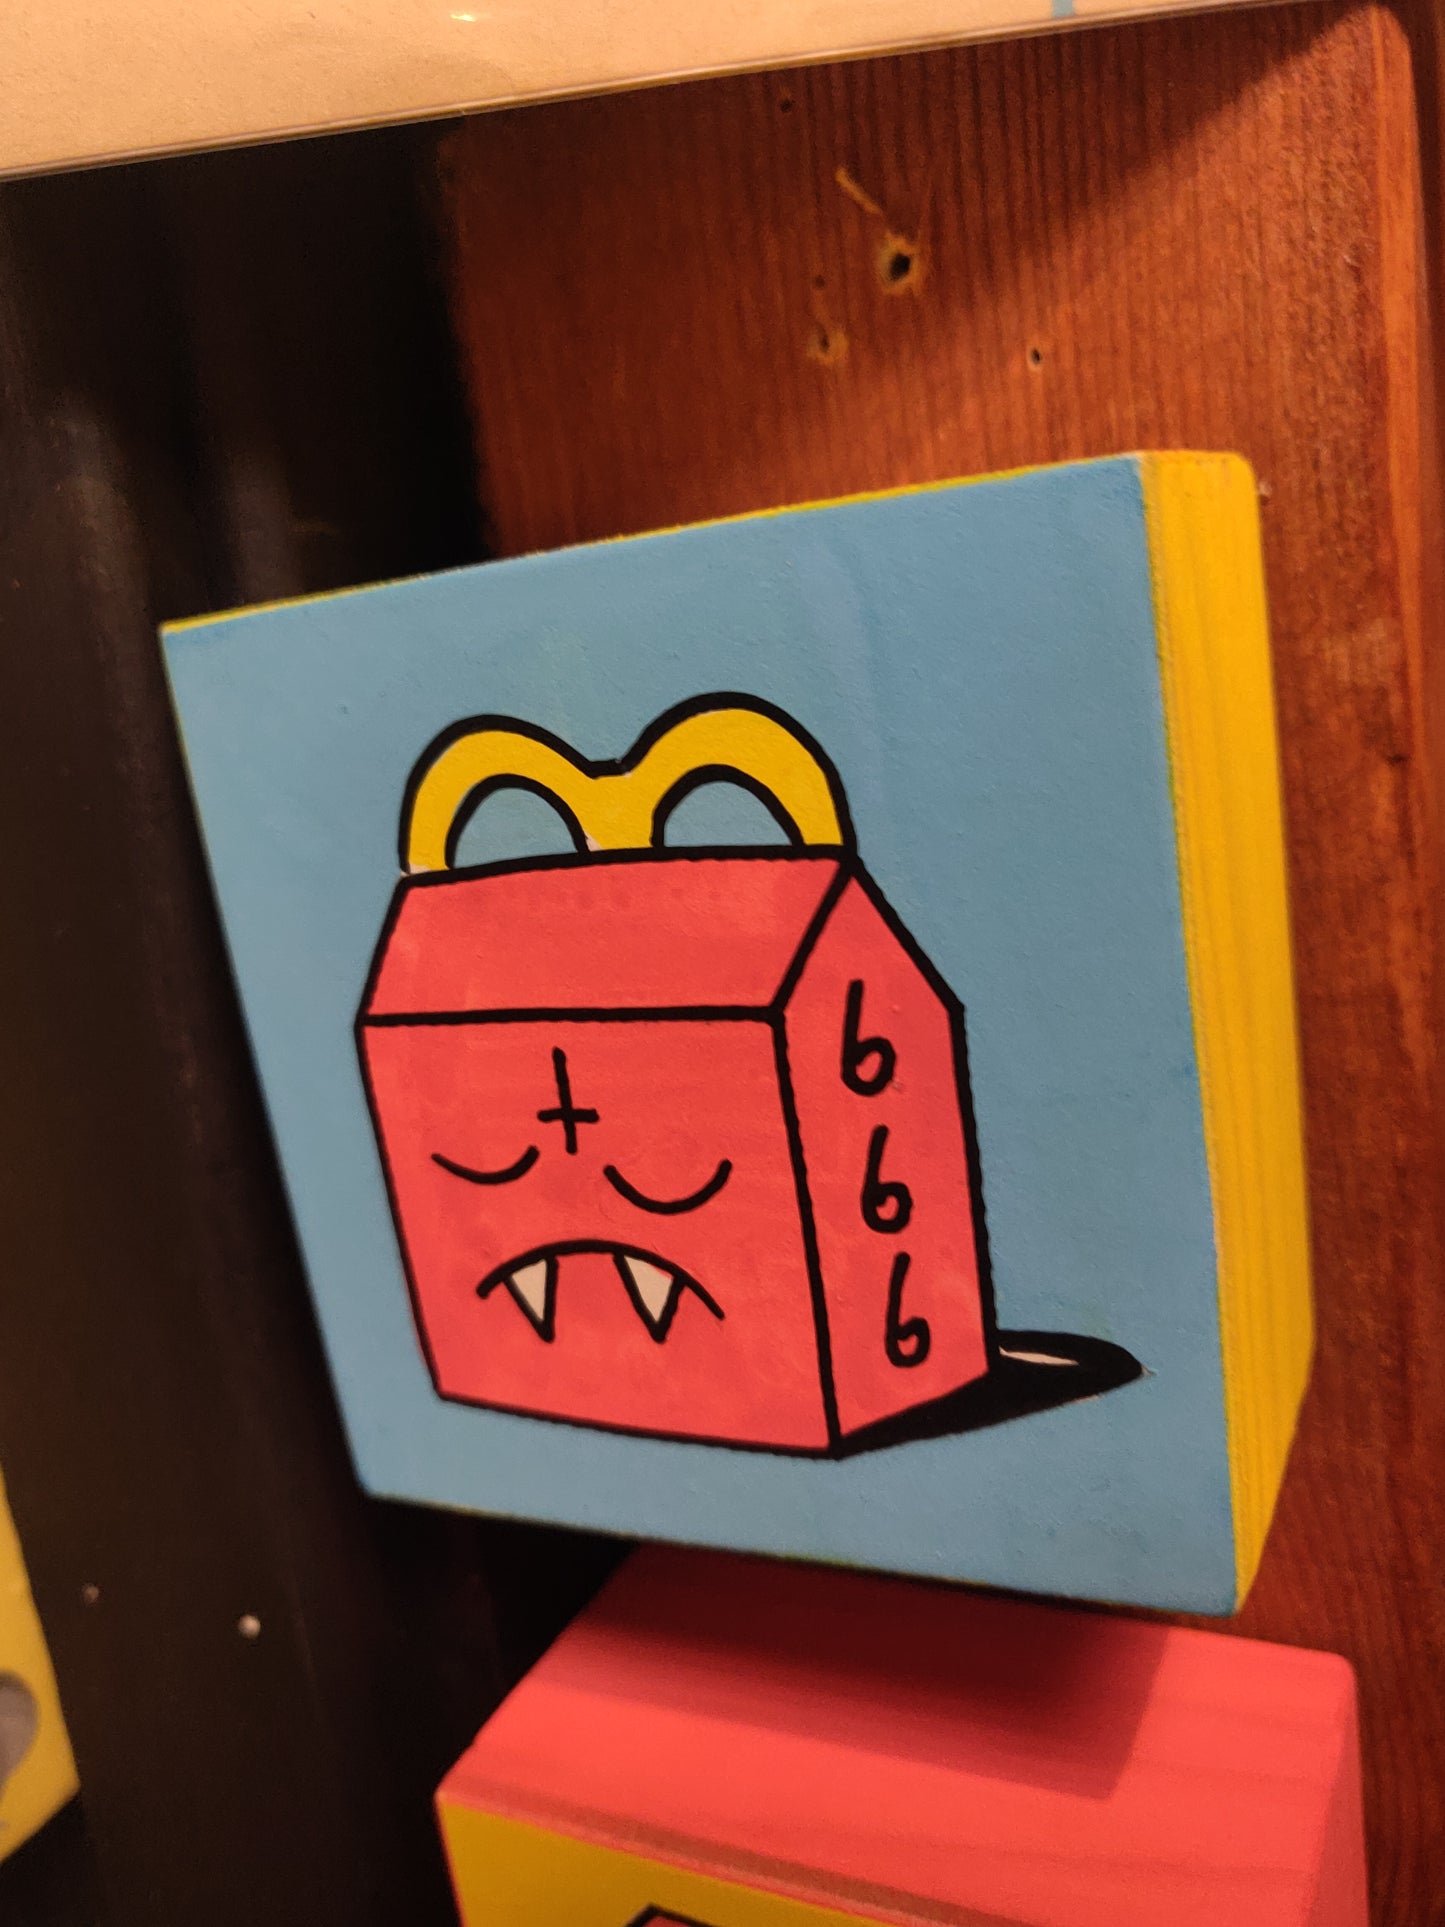 Sad Meal 3x3" PAiNTiNG by the666cat